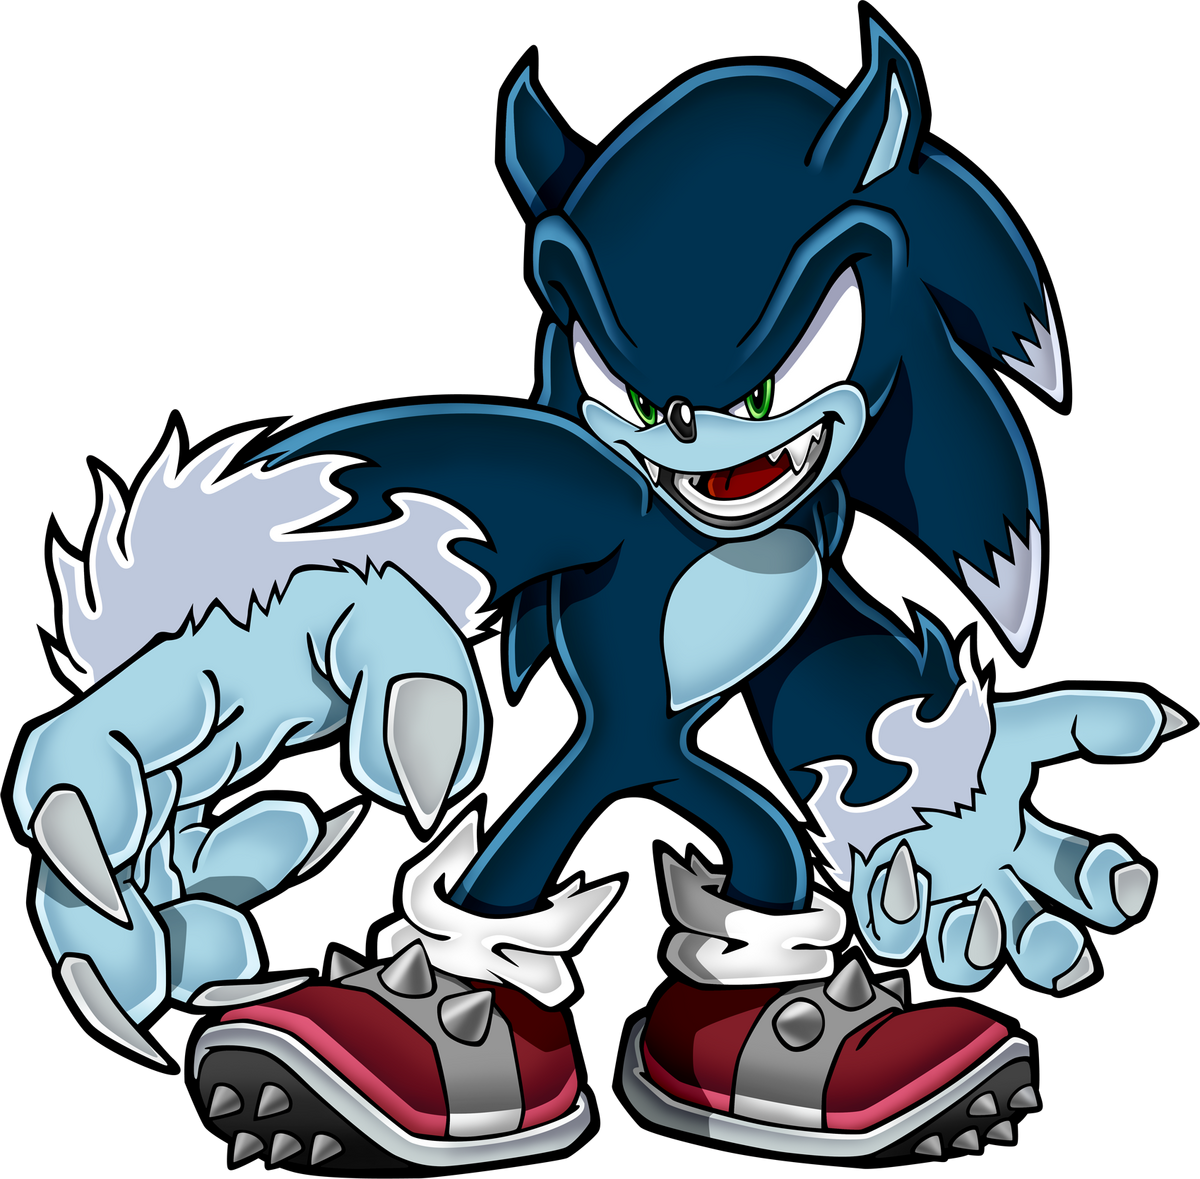 Sonic the hedgehog wi sonic what if wiki